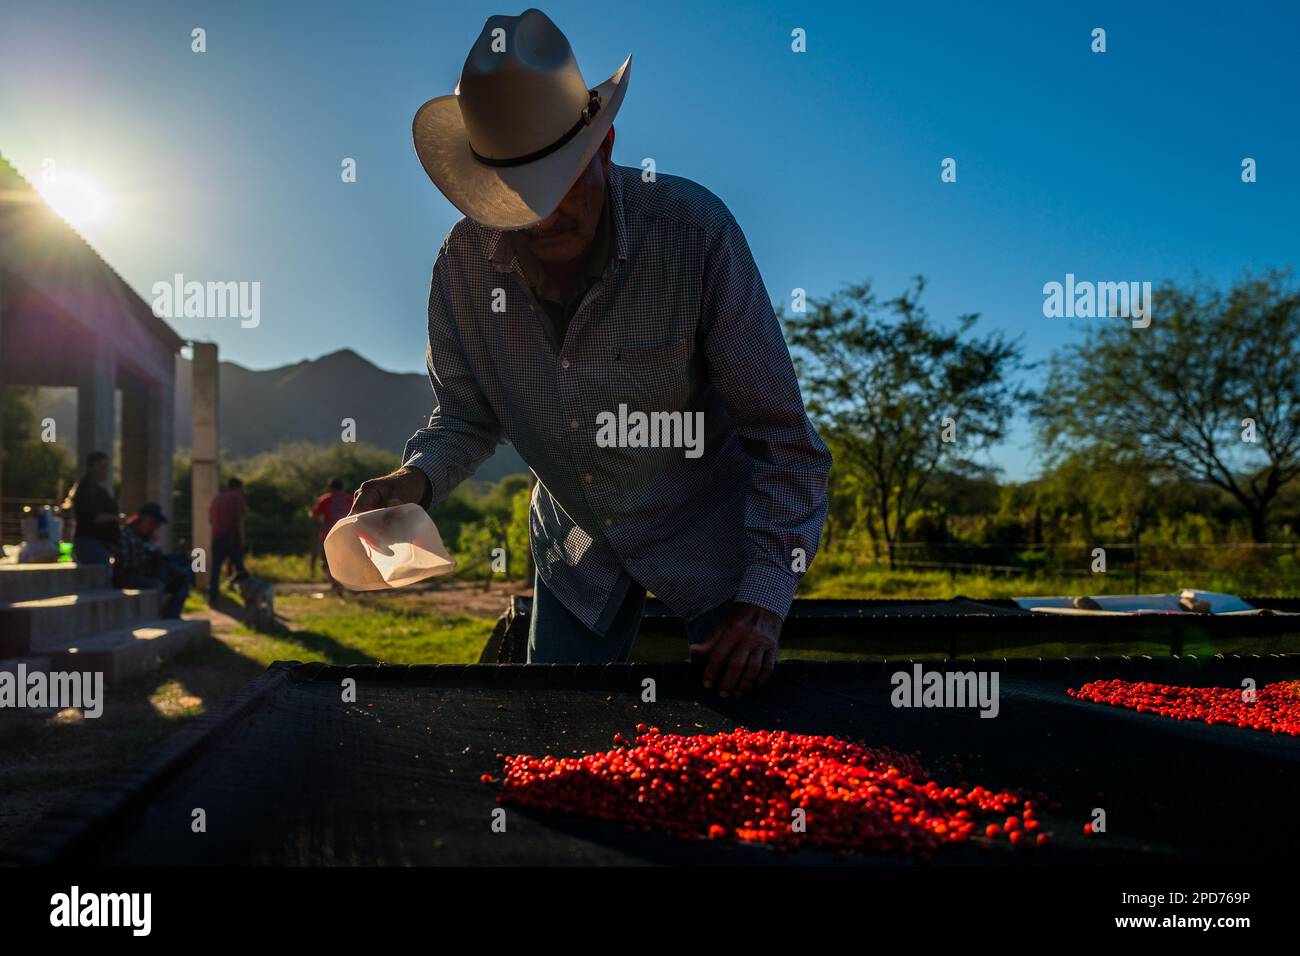 A Mexican rancher collects dried chiltepin peppers, a wild variety of chili pepper, during the sun-drying process on a farm near Baviácora, Mexico. Stock Photo